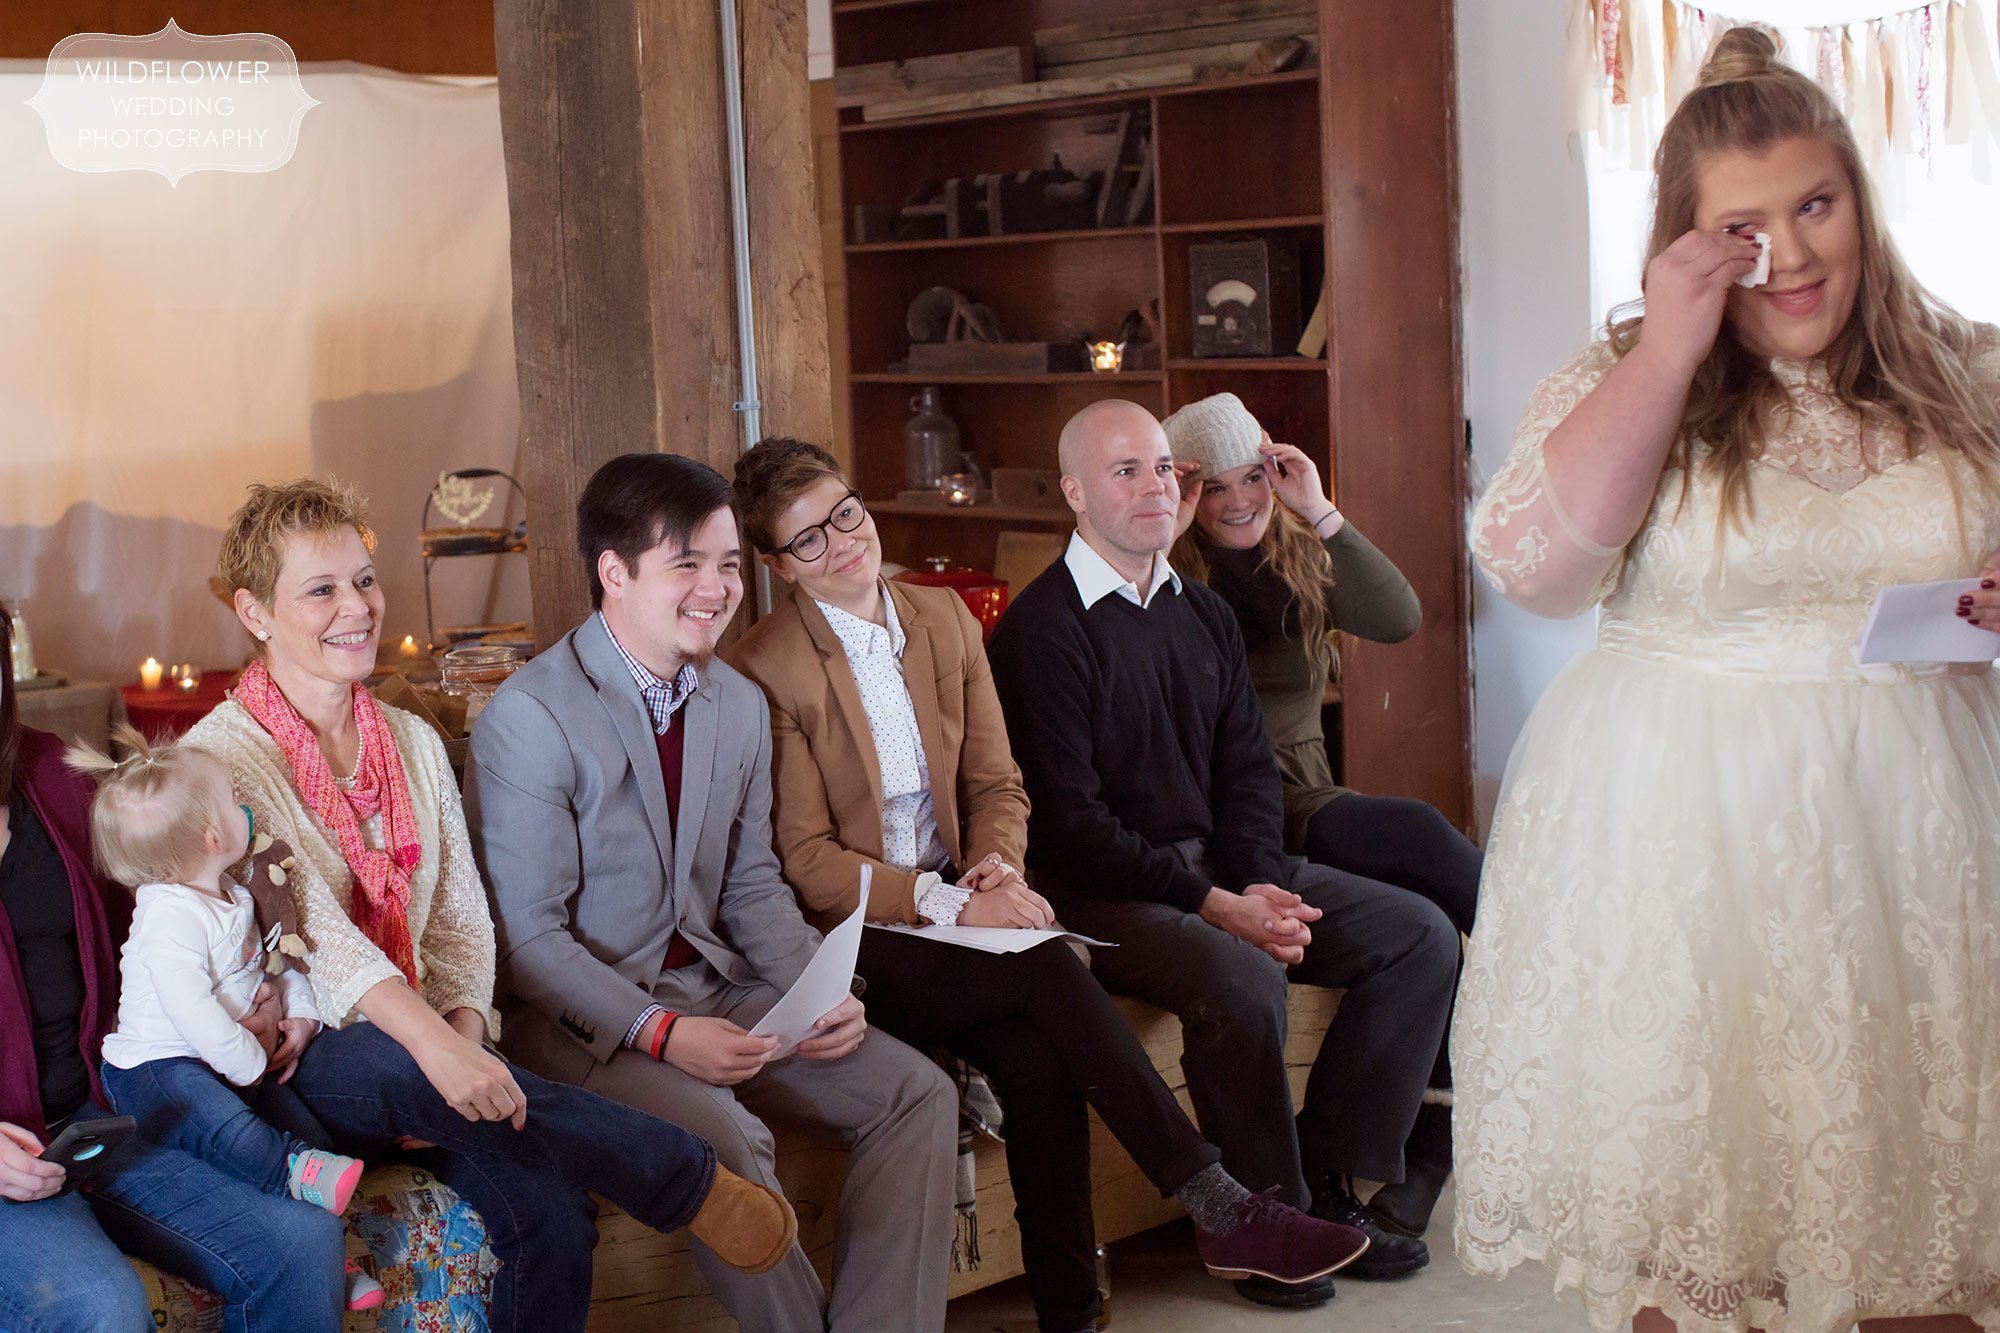 Candid moments of guests and family watching the winter wedding ceremony in the barn.